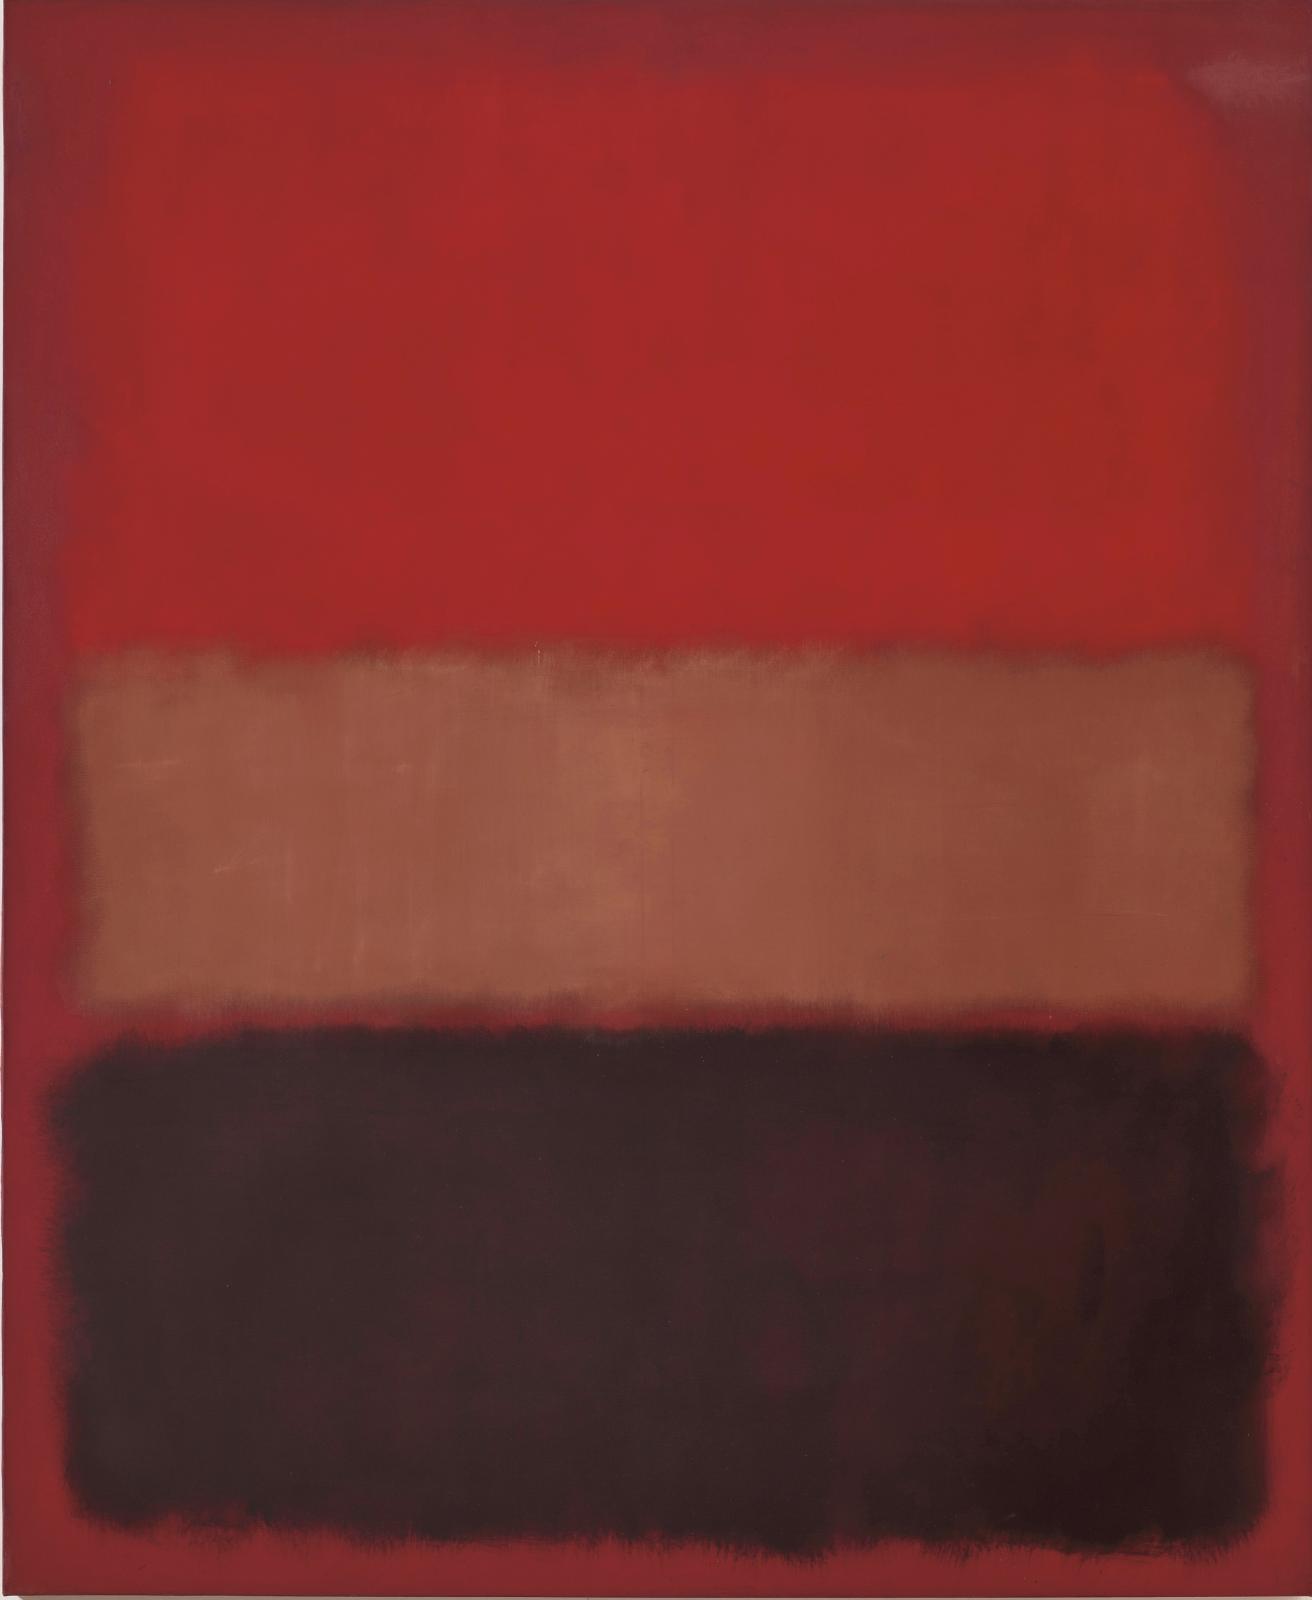 Mark Rothko, No. 46 [Black, Ochre, Red Over Red], 1957, huile sur toile, 252.73 x 207.01 x 4.45 cm (détail). The Museum of Contemporary Ar